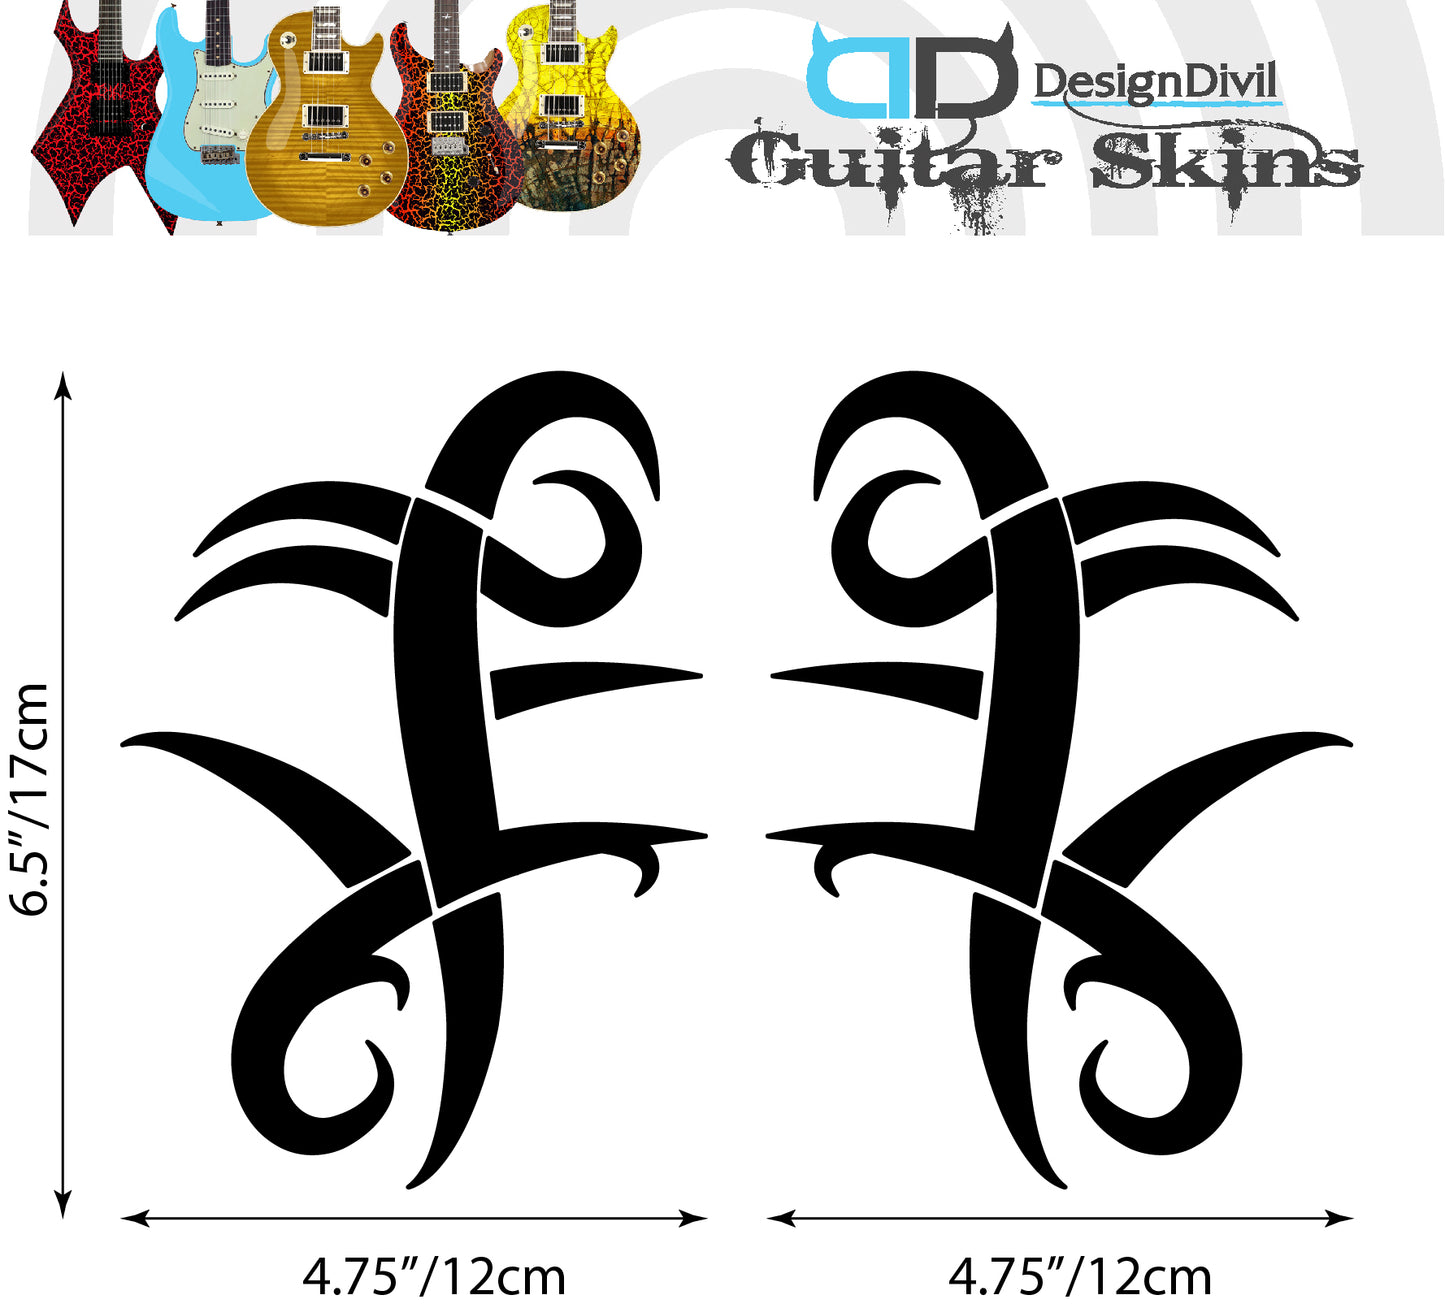 Customized Tribal War Decal Sticker for Guitars & Basses 6 Colour Options.